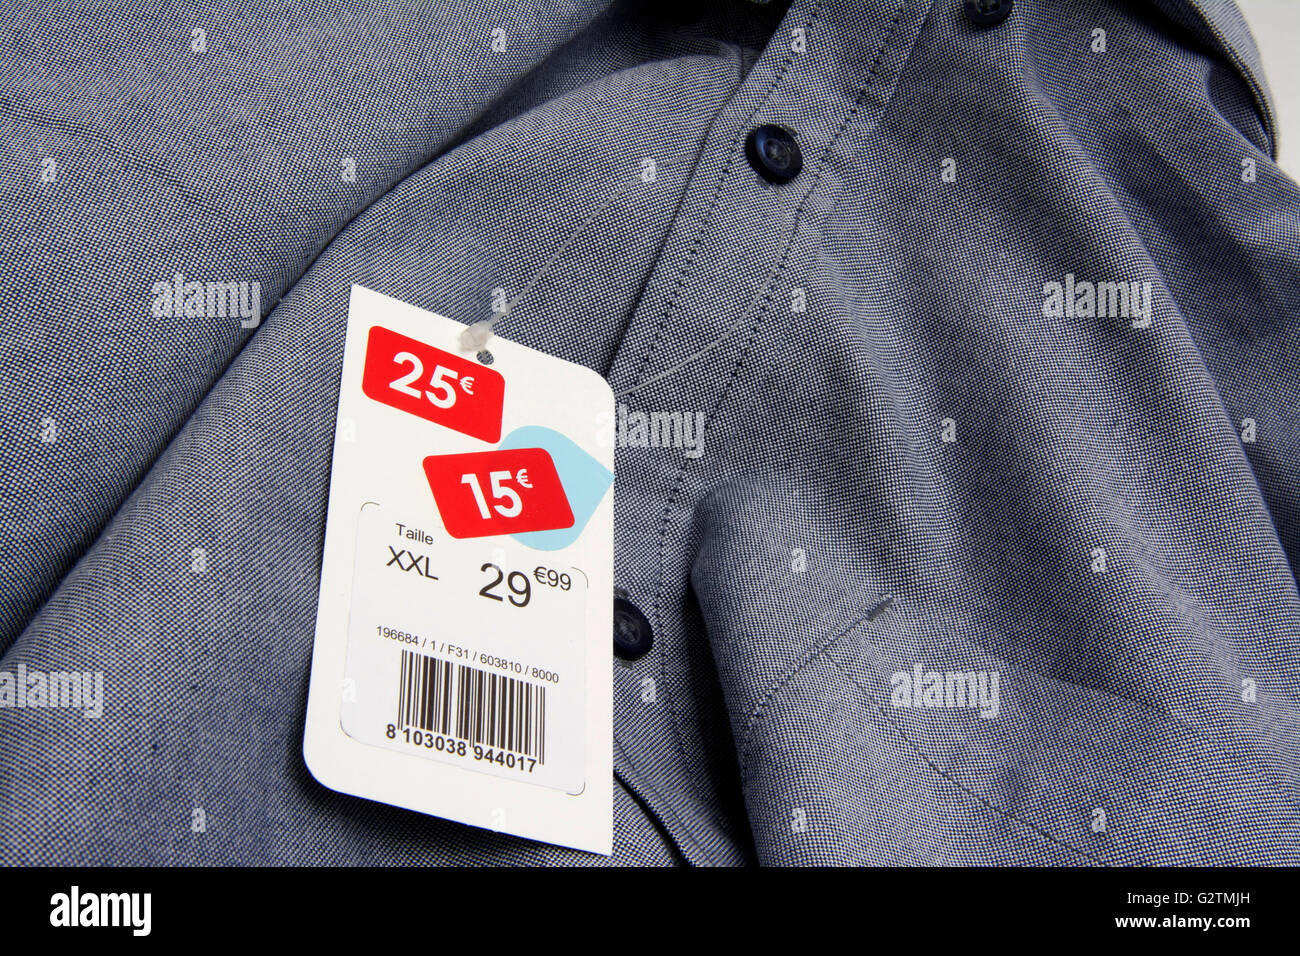 Clothing in the sales, reduced price tag in Euro Stock Photo - Alamy